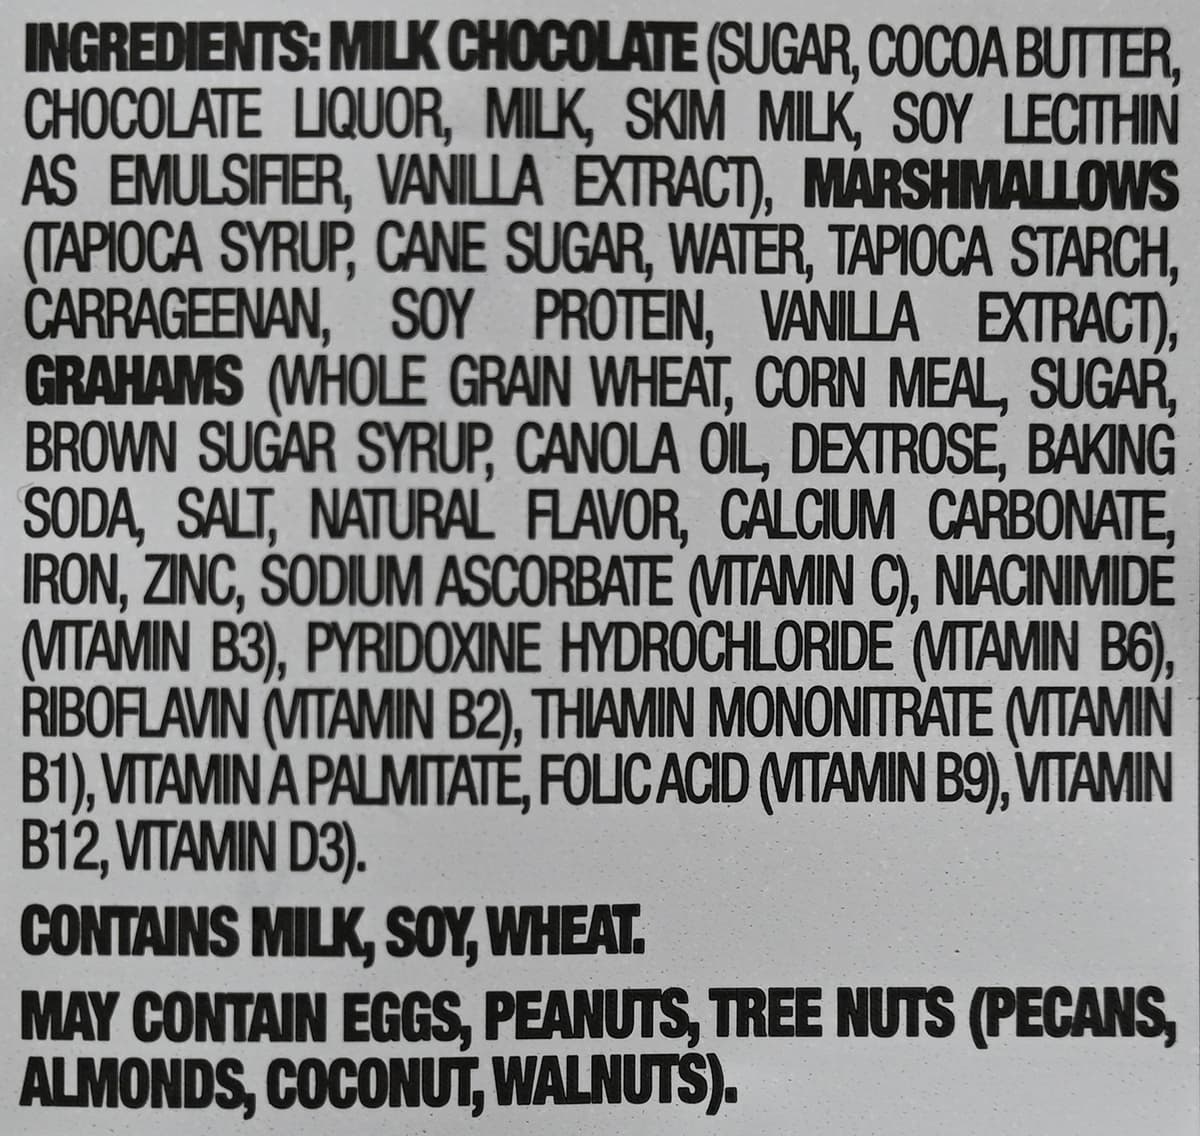 Image of the ingredients list from the back of the bag.